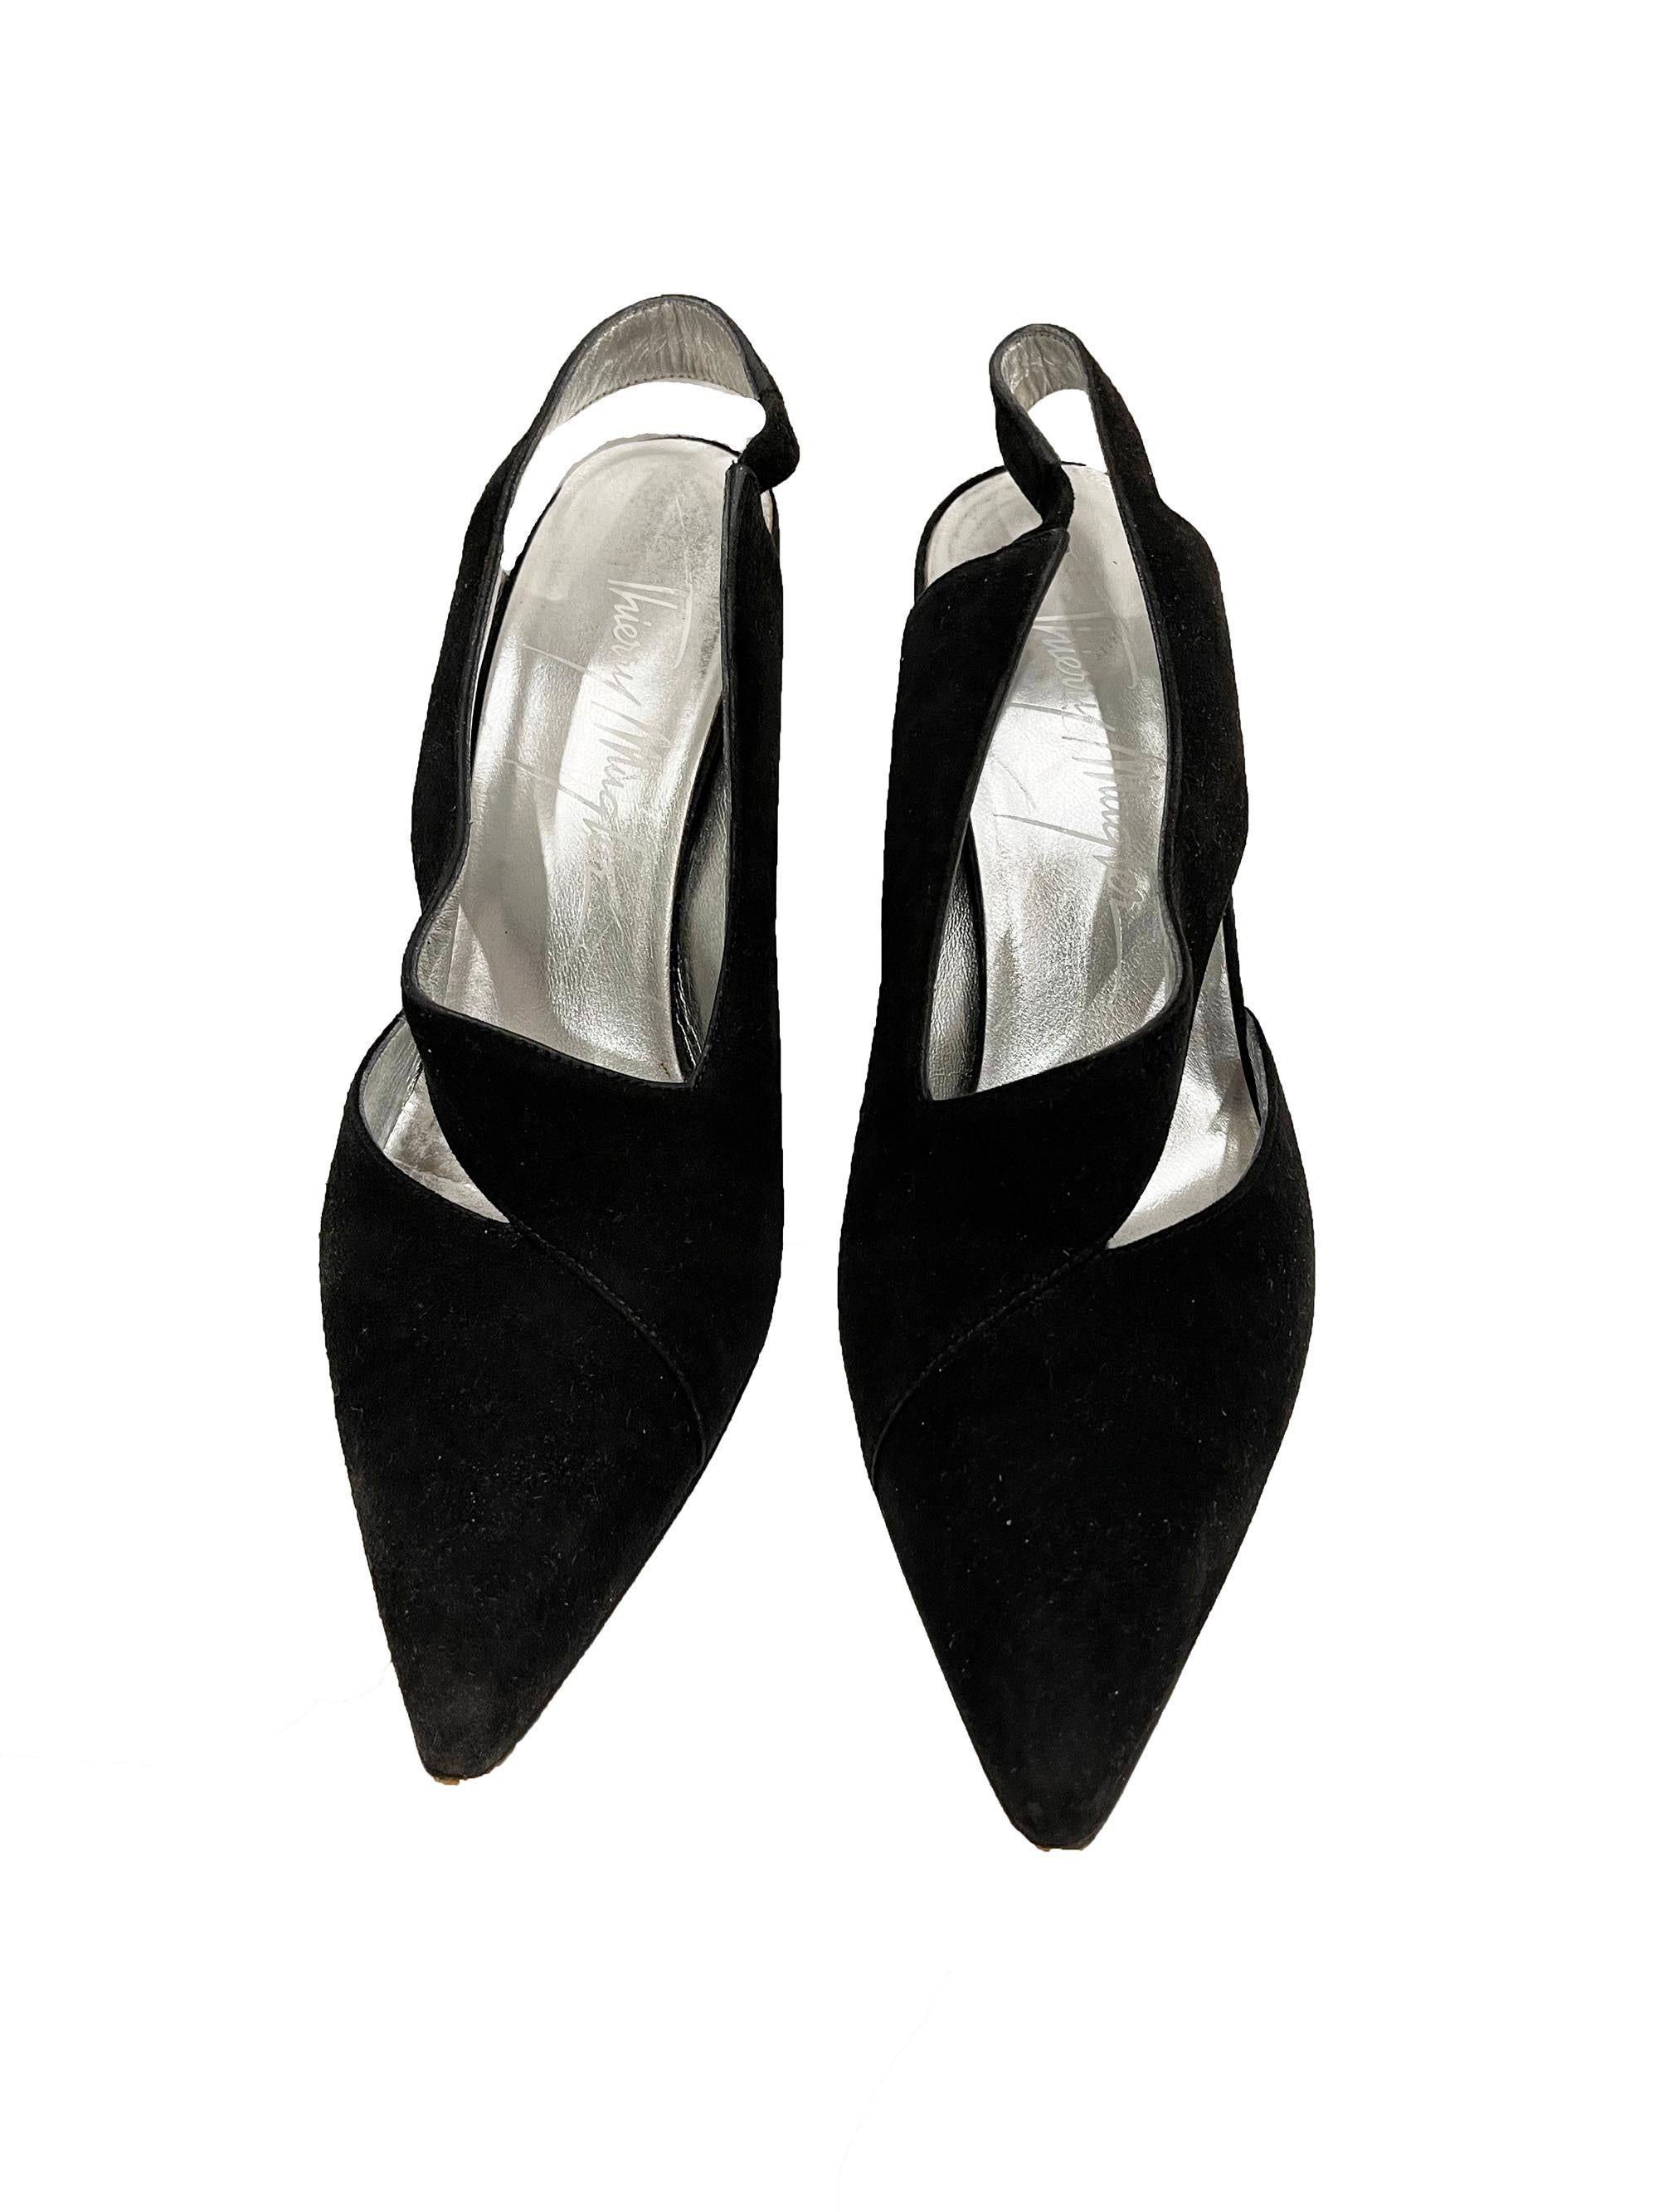 Thierry Mugler Heels sz 8
condition: Good, some all over wear
shoes may run 1/2 size smaller due to vintage sizing